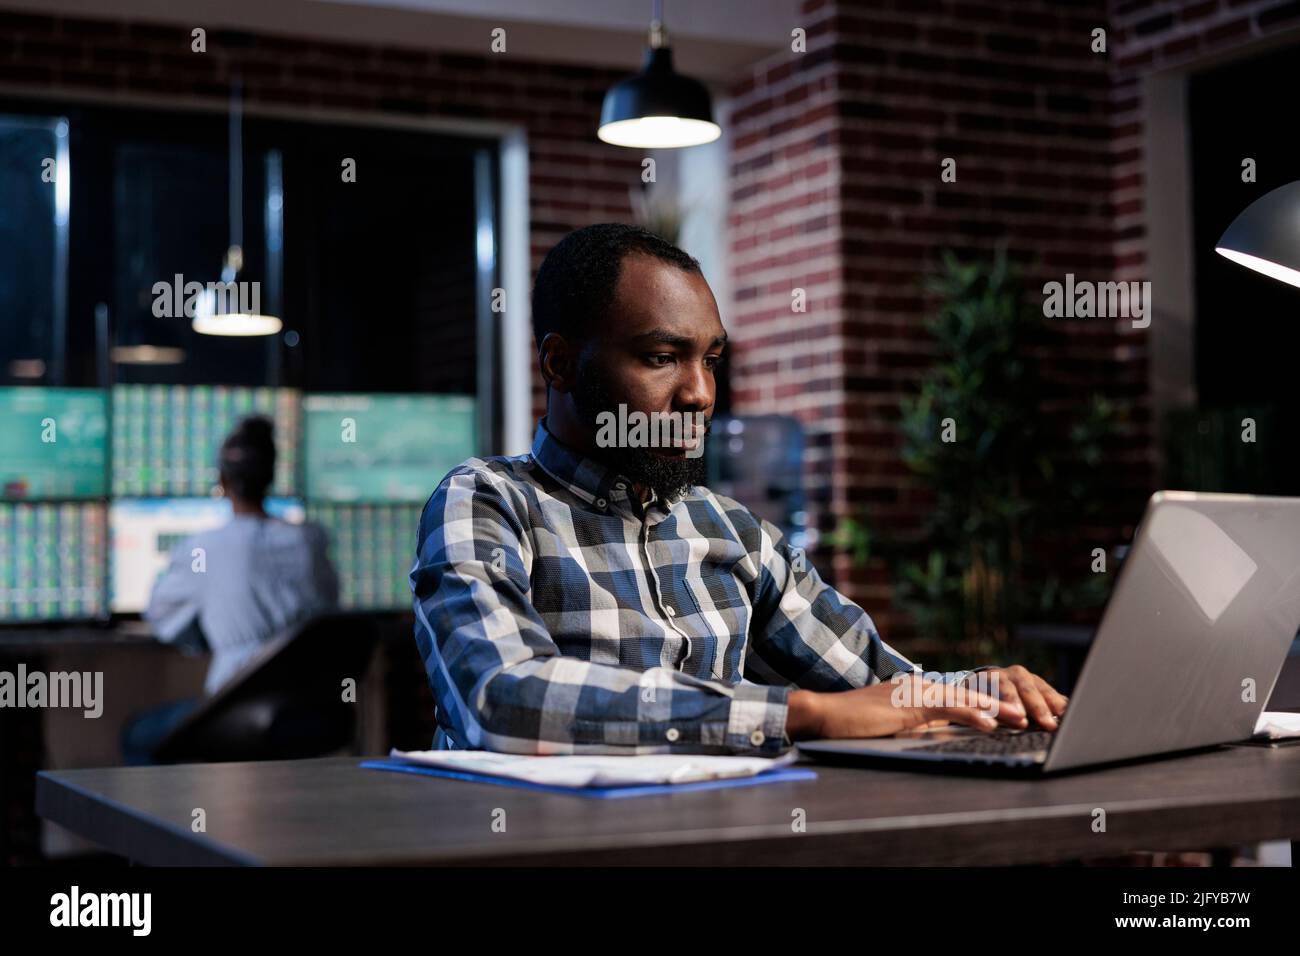 African american business man sitting at desk in office workspace while using laptop to analyze market trend. Professional trader doing technical analysis regarding forex stock trading at night. Stock Photo